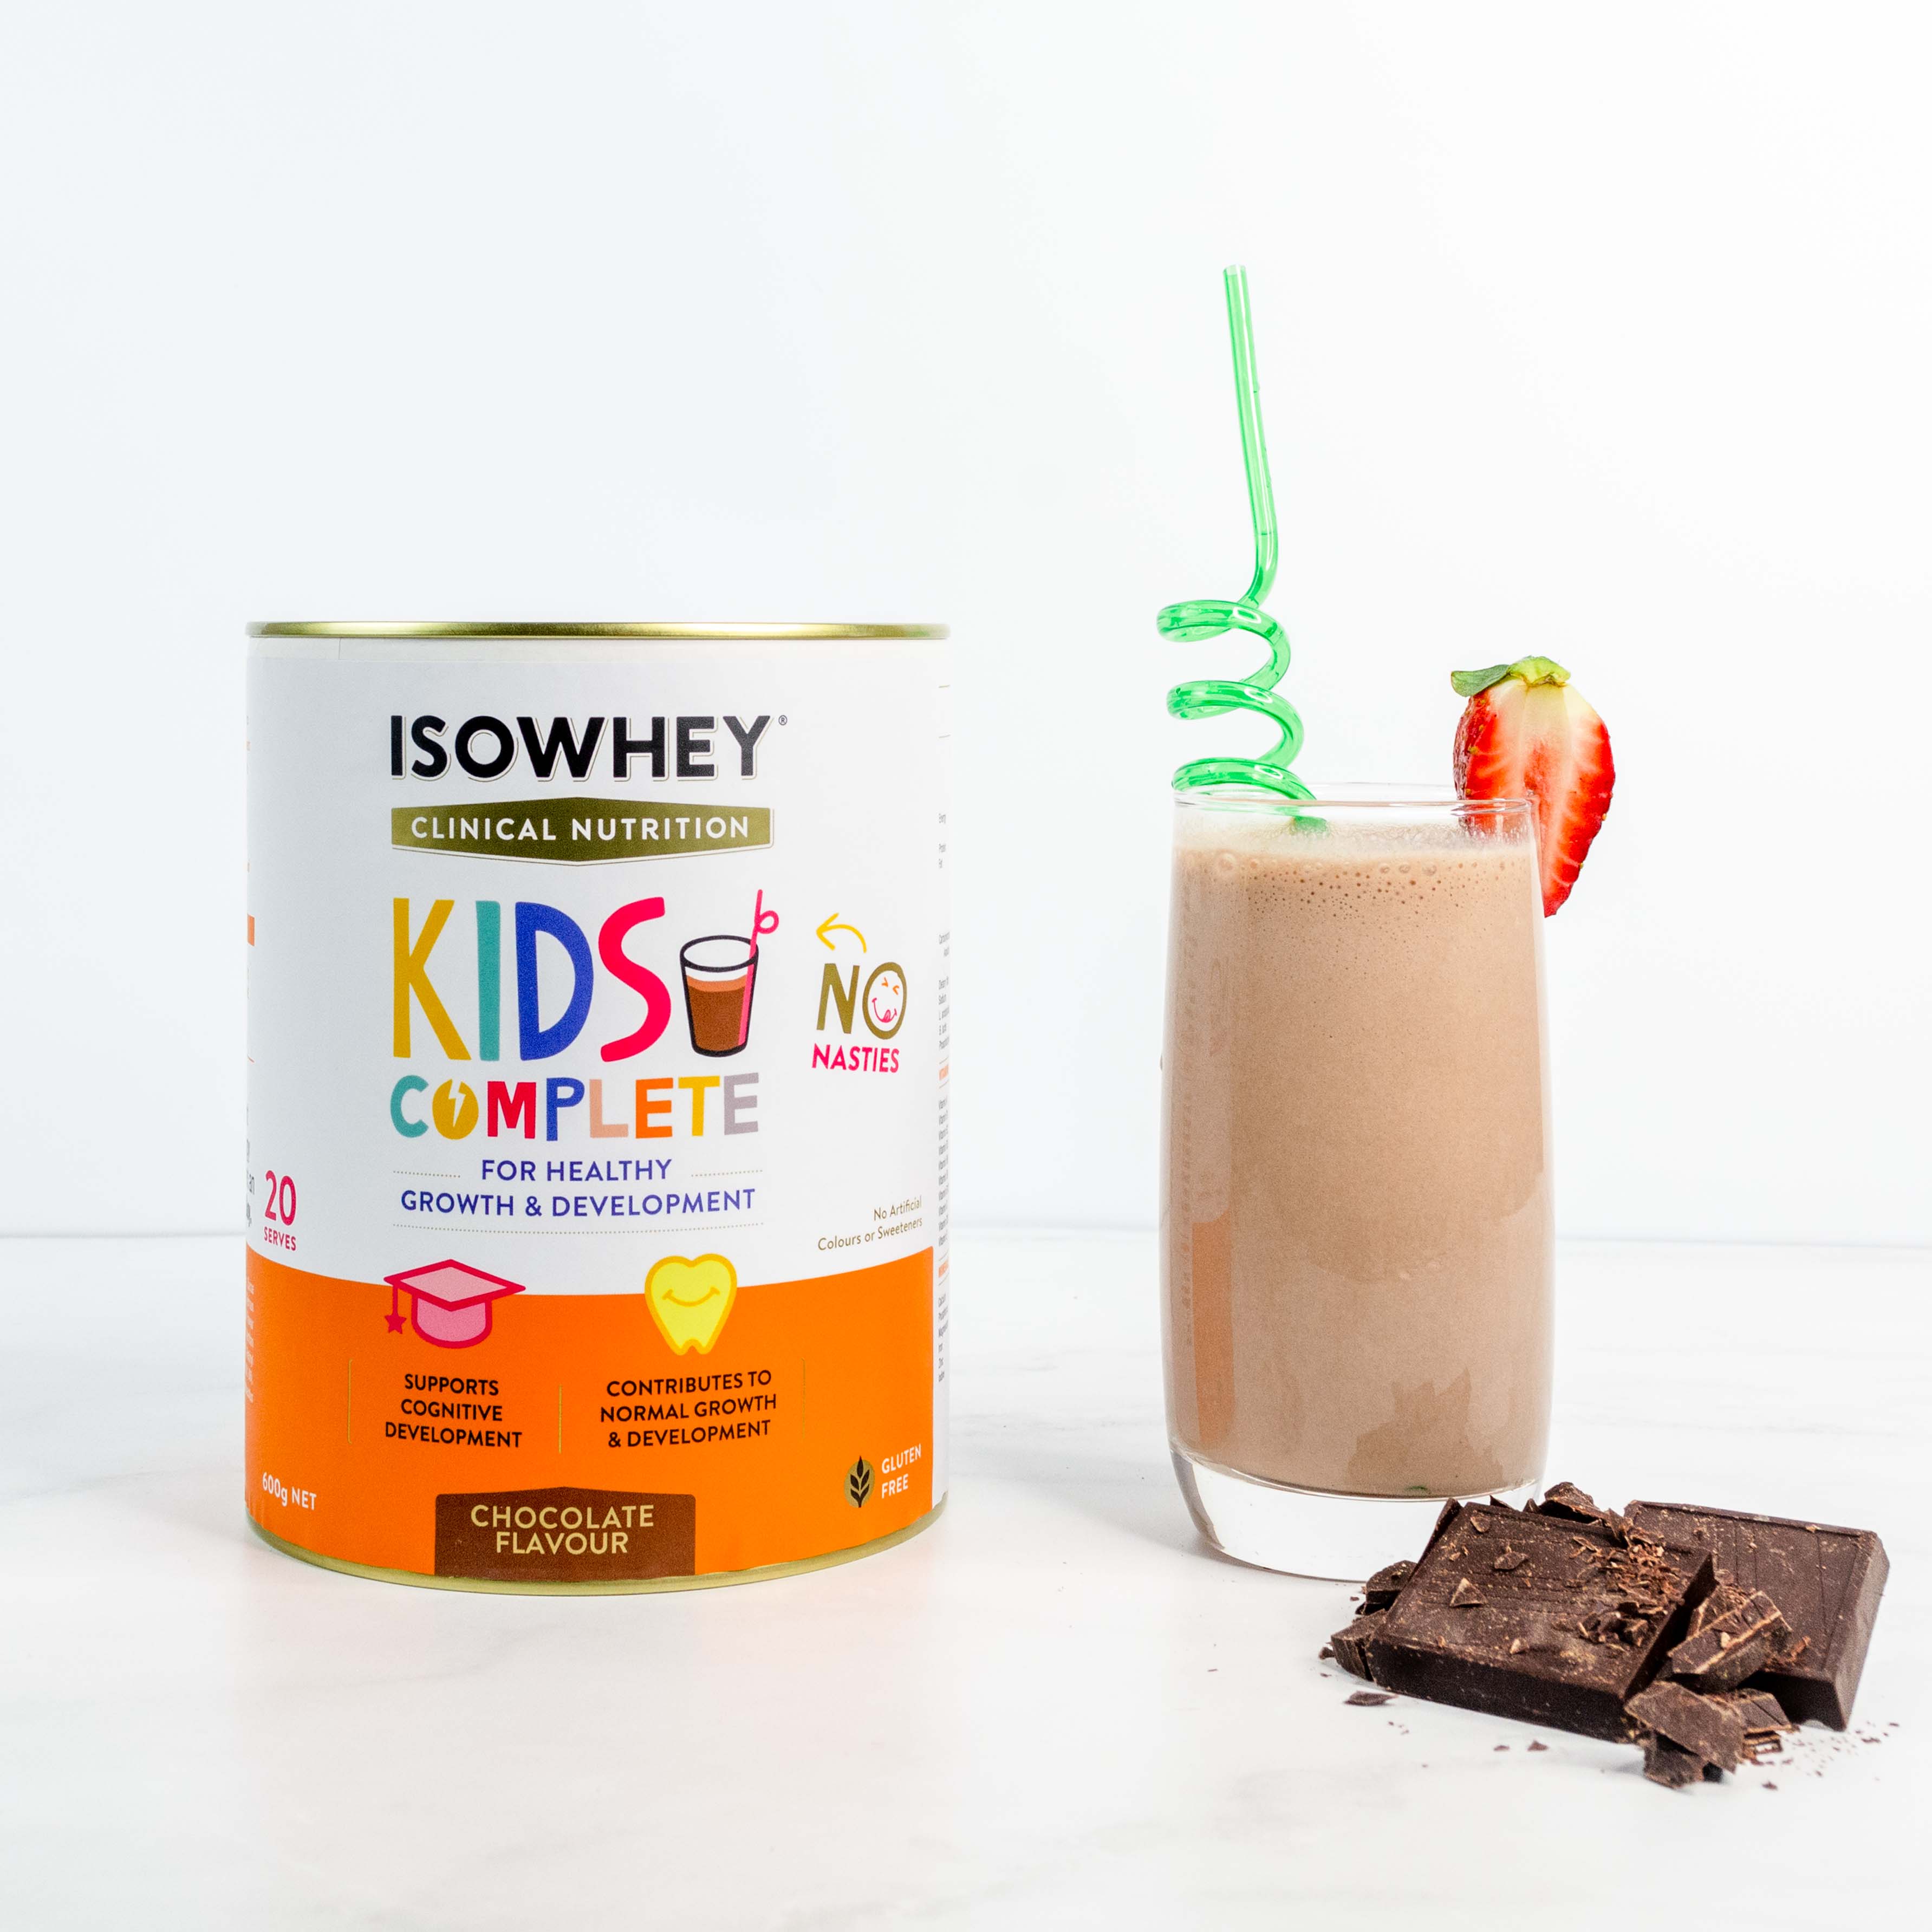 IsoWhey Clinical Nutrition Kids Complete Chocolate 600g with glass of Isowhey shake & choco bar